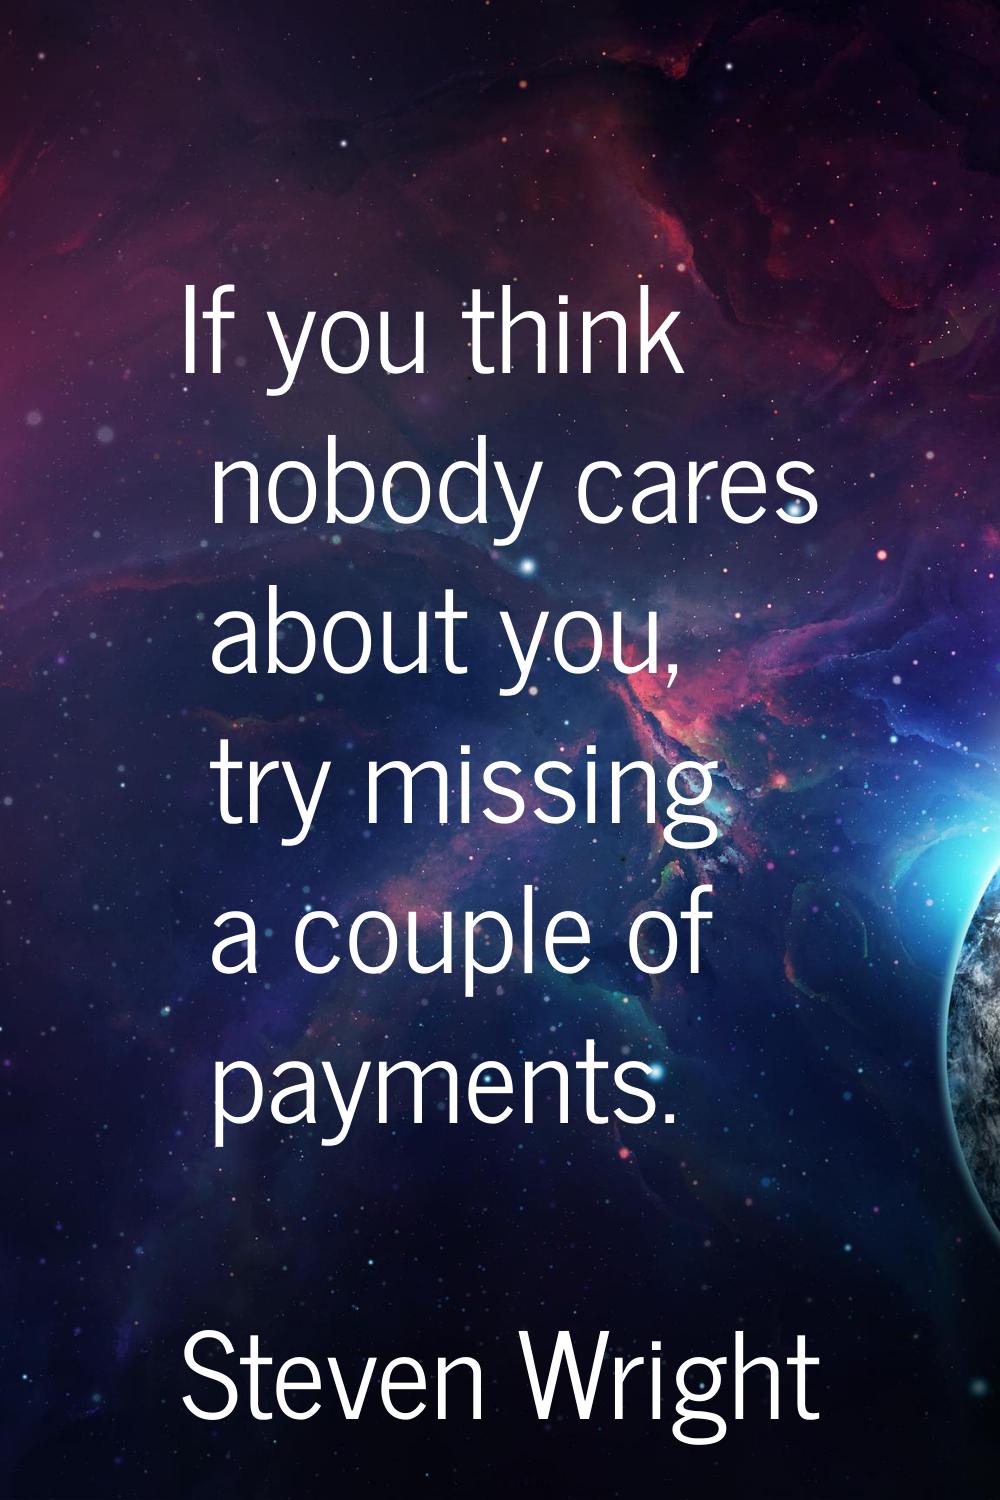 If you think nobody cares about you, try missing a couple of payments.